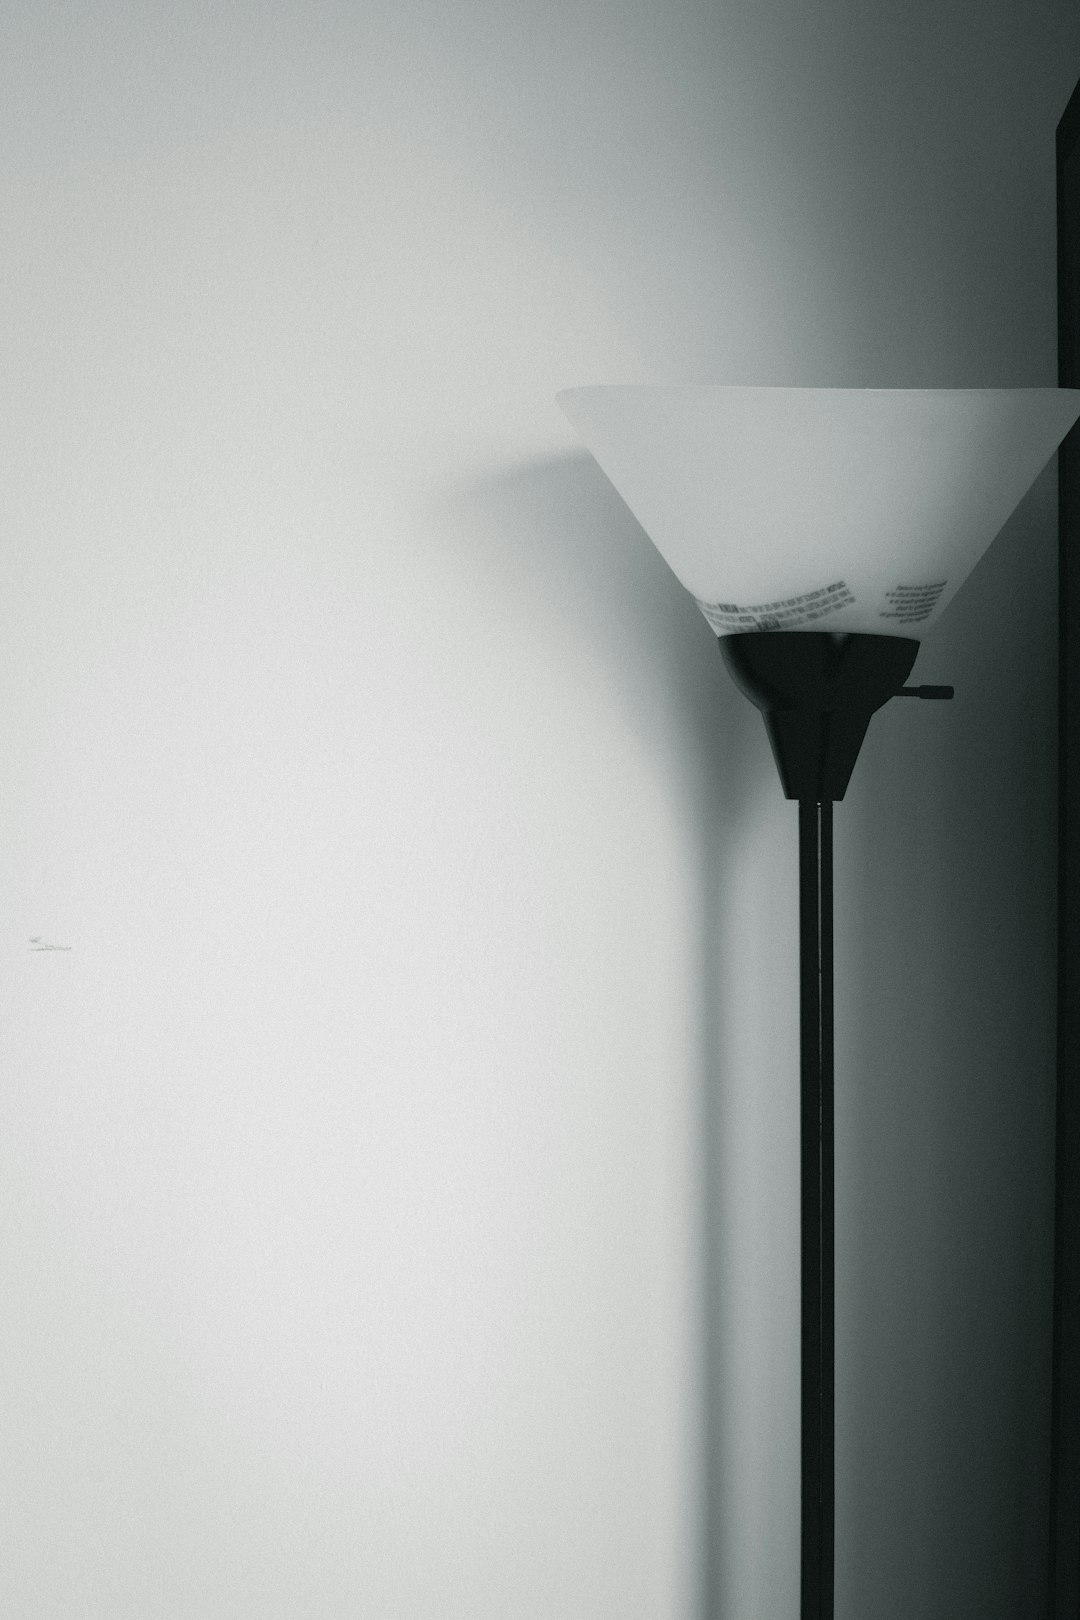 turned-off black and white torchiere lamp